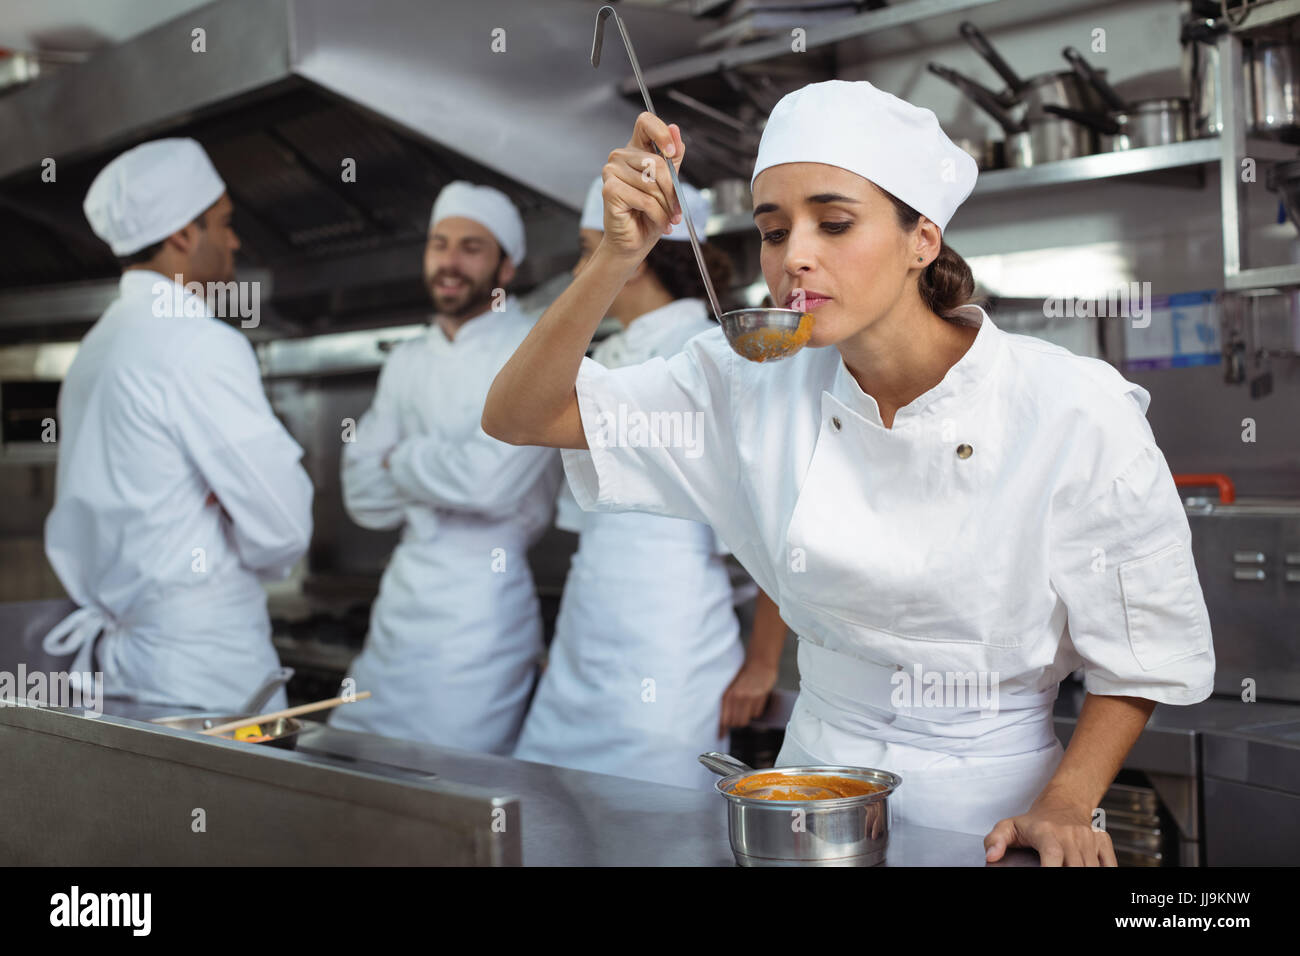 https://c8.alamy.com/comp/JJ9KNW/chef-tasting-food-from-spoon-in-kitchen-at-restaurant-JJ9KNW.jpg